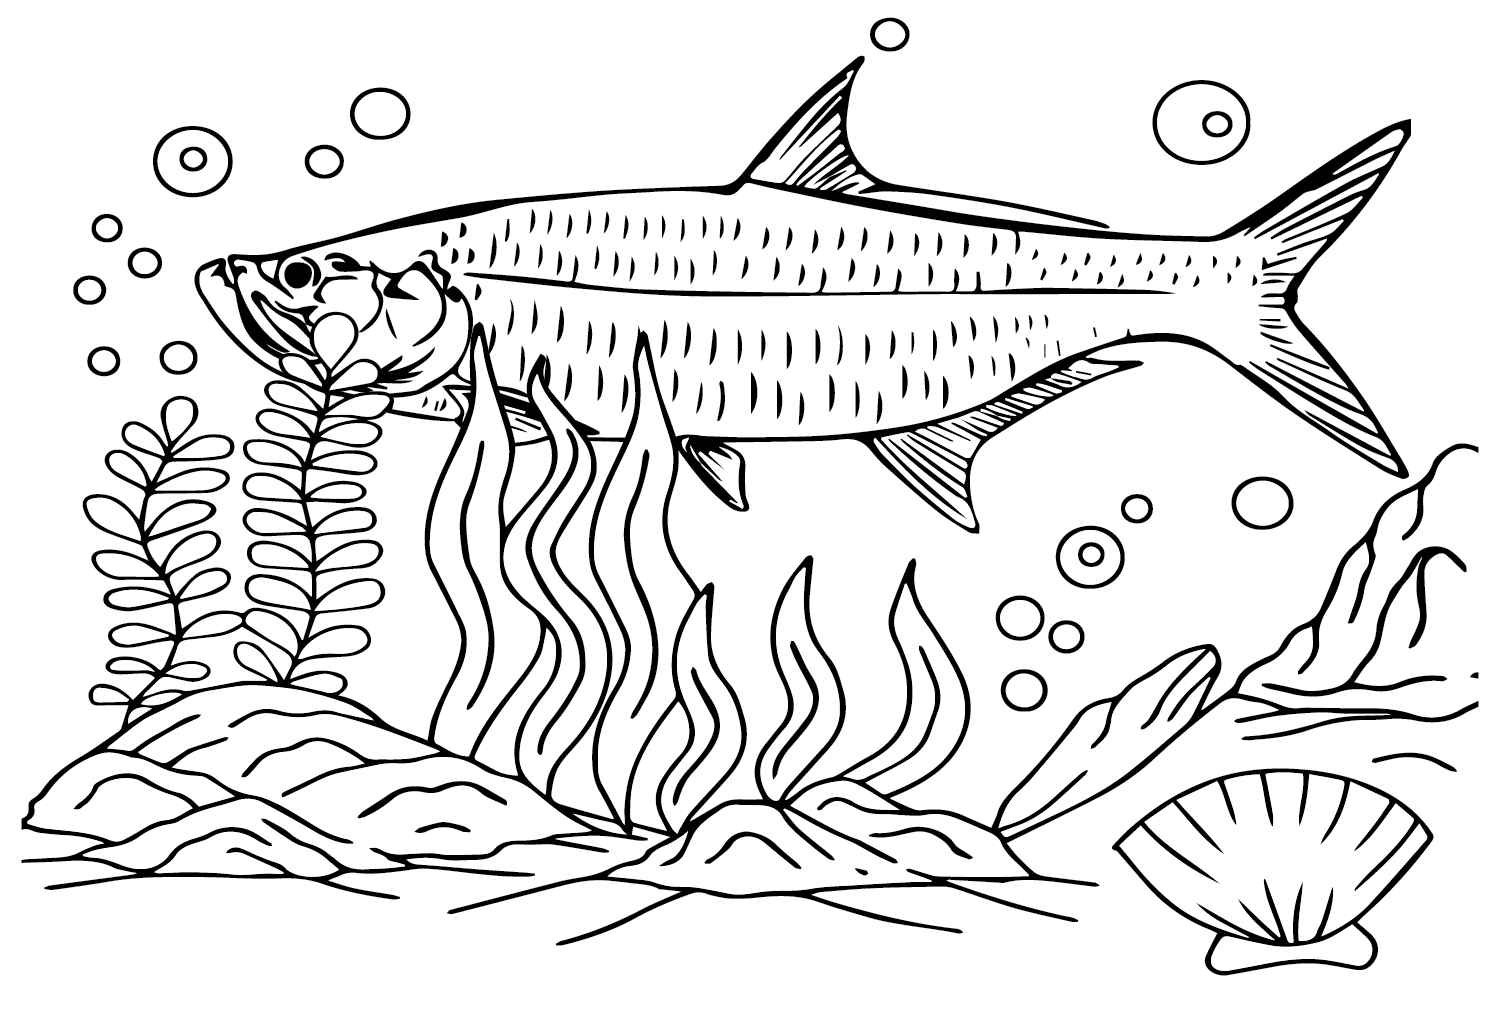 Tarpon Jump on the Water Coloring Pages - Tarpon Coloring Pages ...